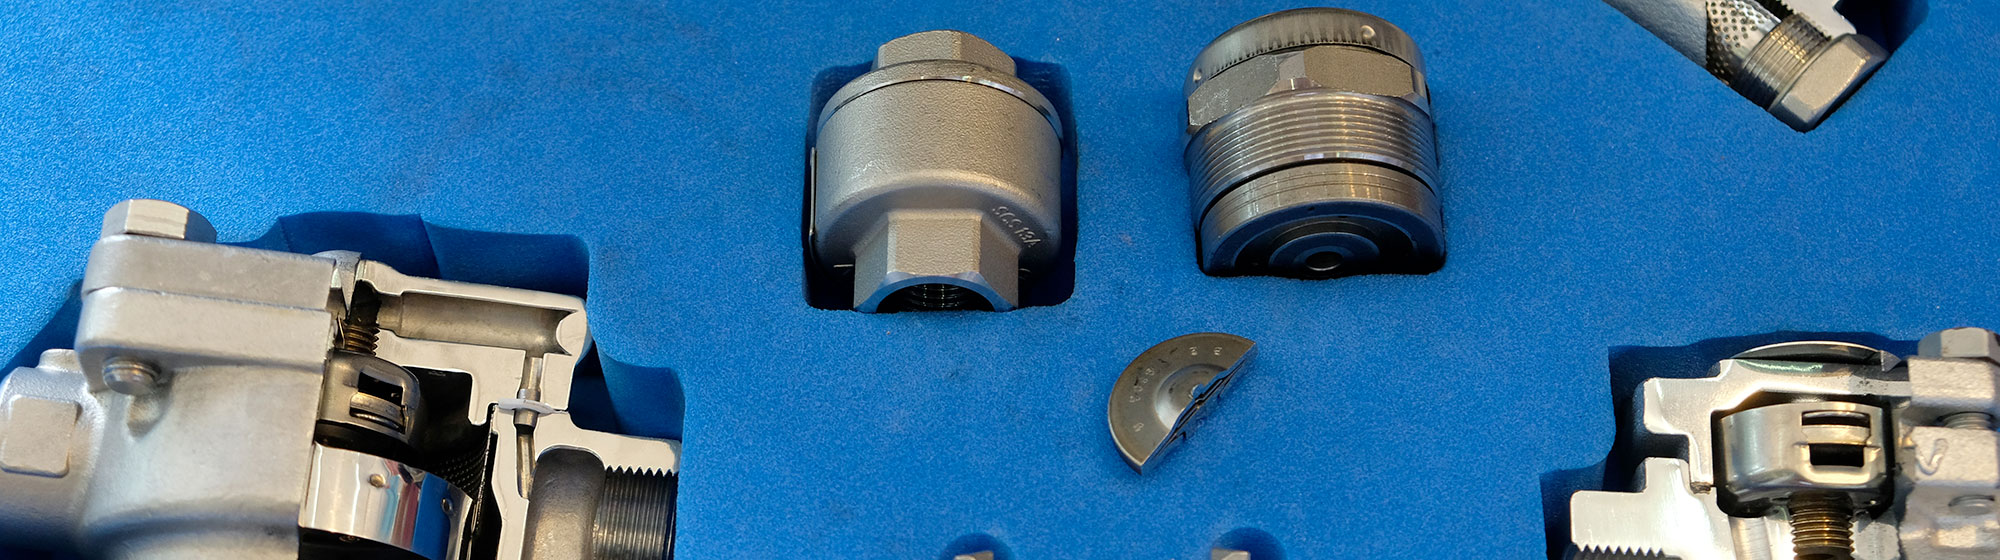 Equipment and mechanical tool parts in a case